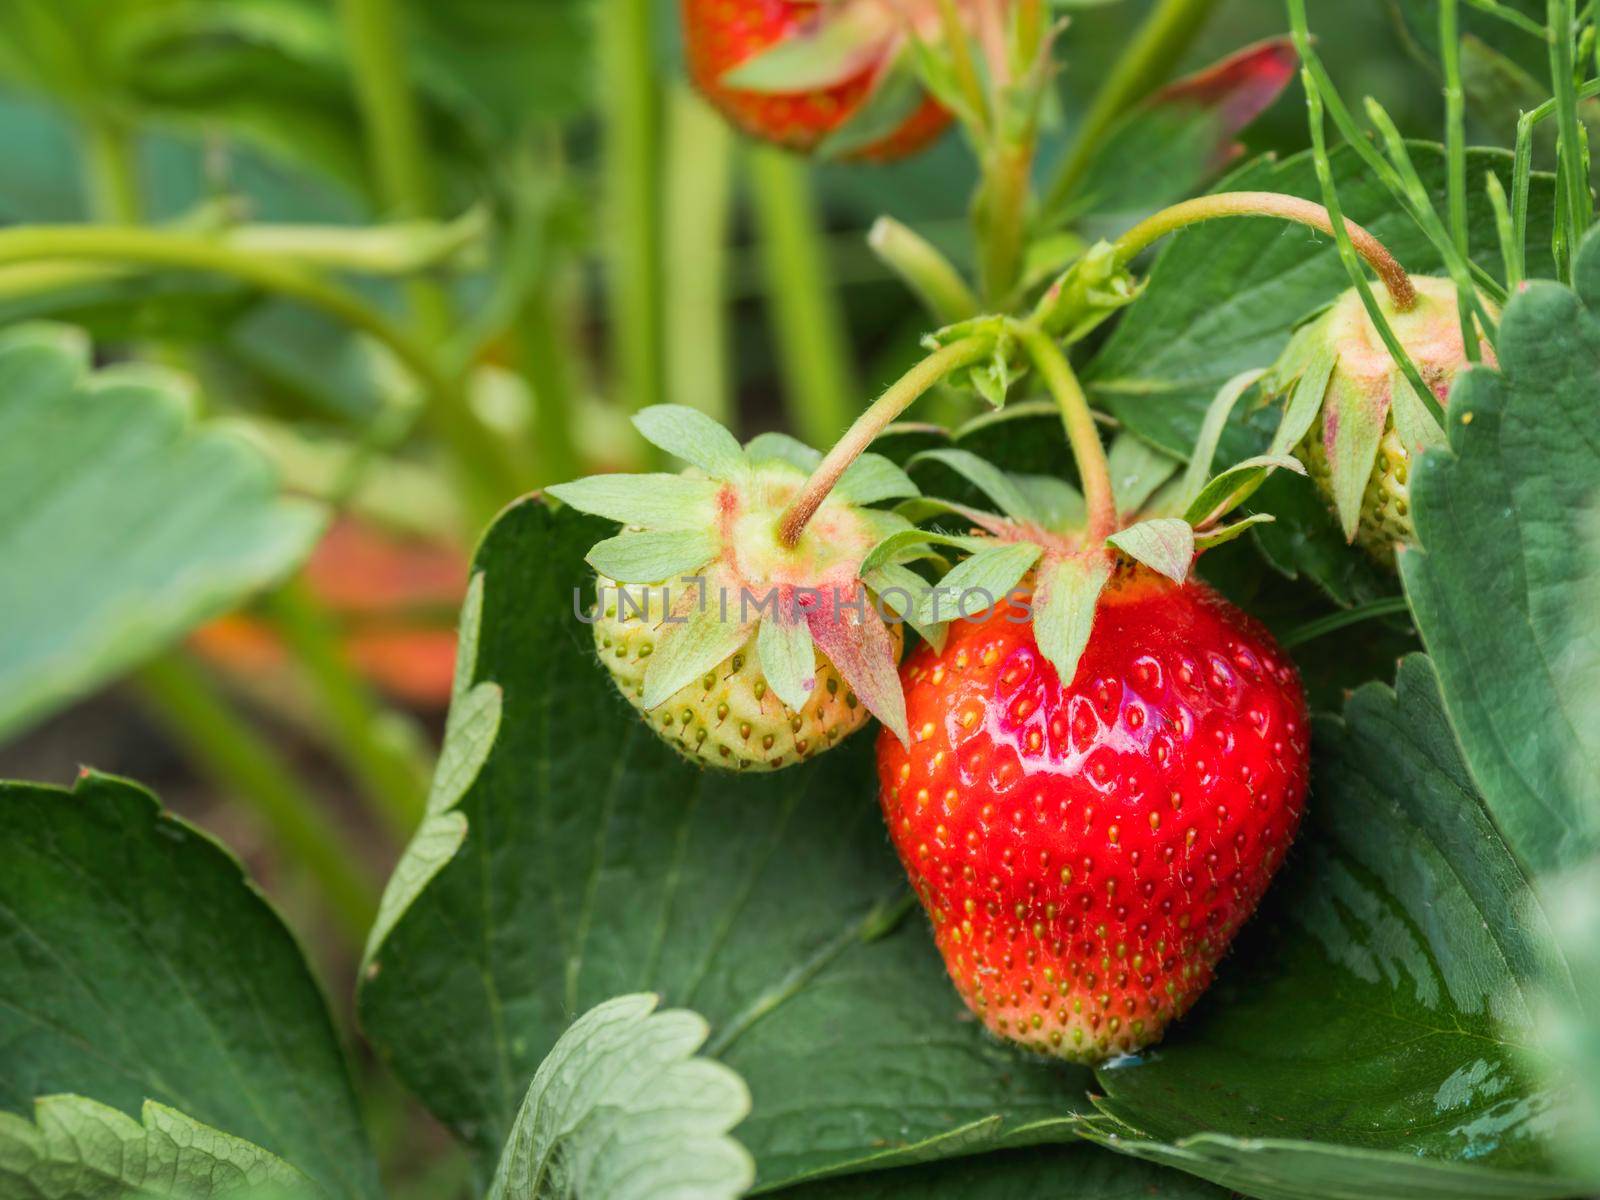 Red and green strawberries under leaves. Sunny day in garden with growing berries. Agriculture.